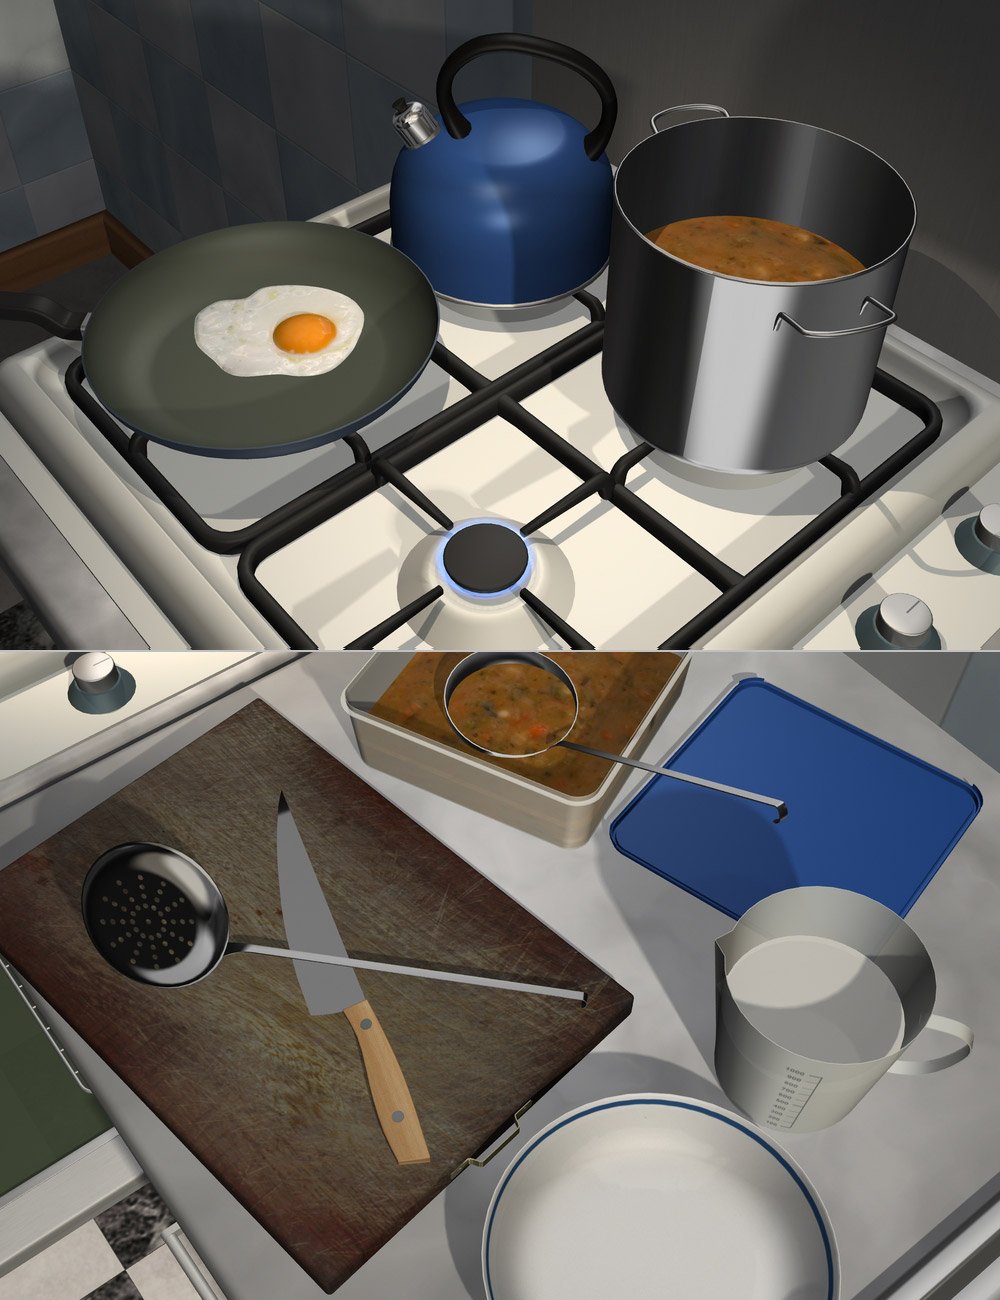 Home One Kitchen by: maclean, 3D Models by Daz 3D